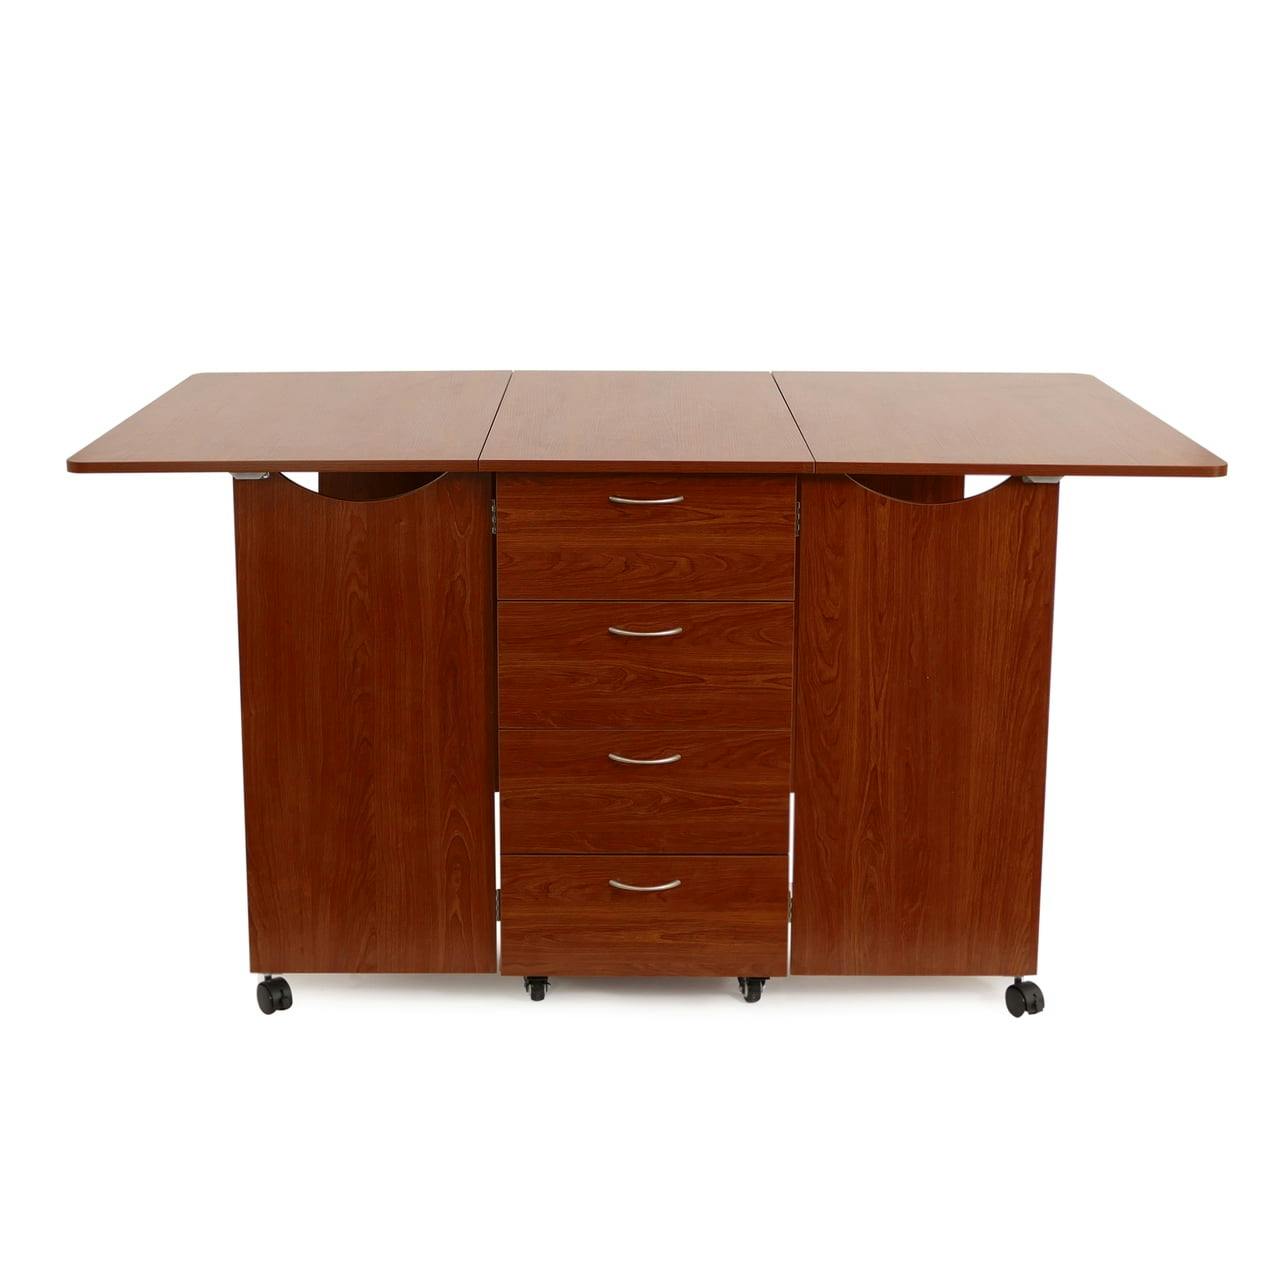 Teak Expandable CraftMaster Cutting Table with Storage